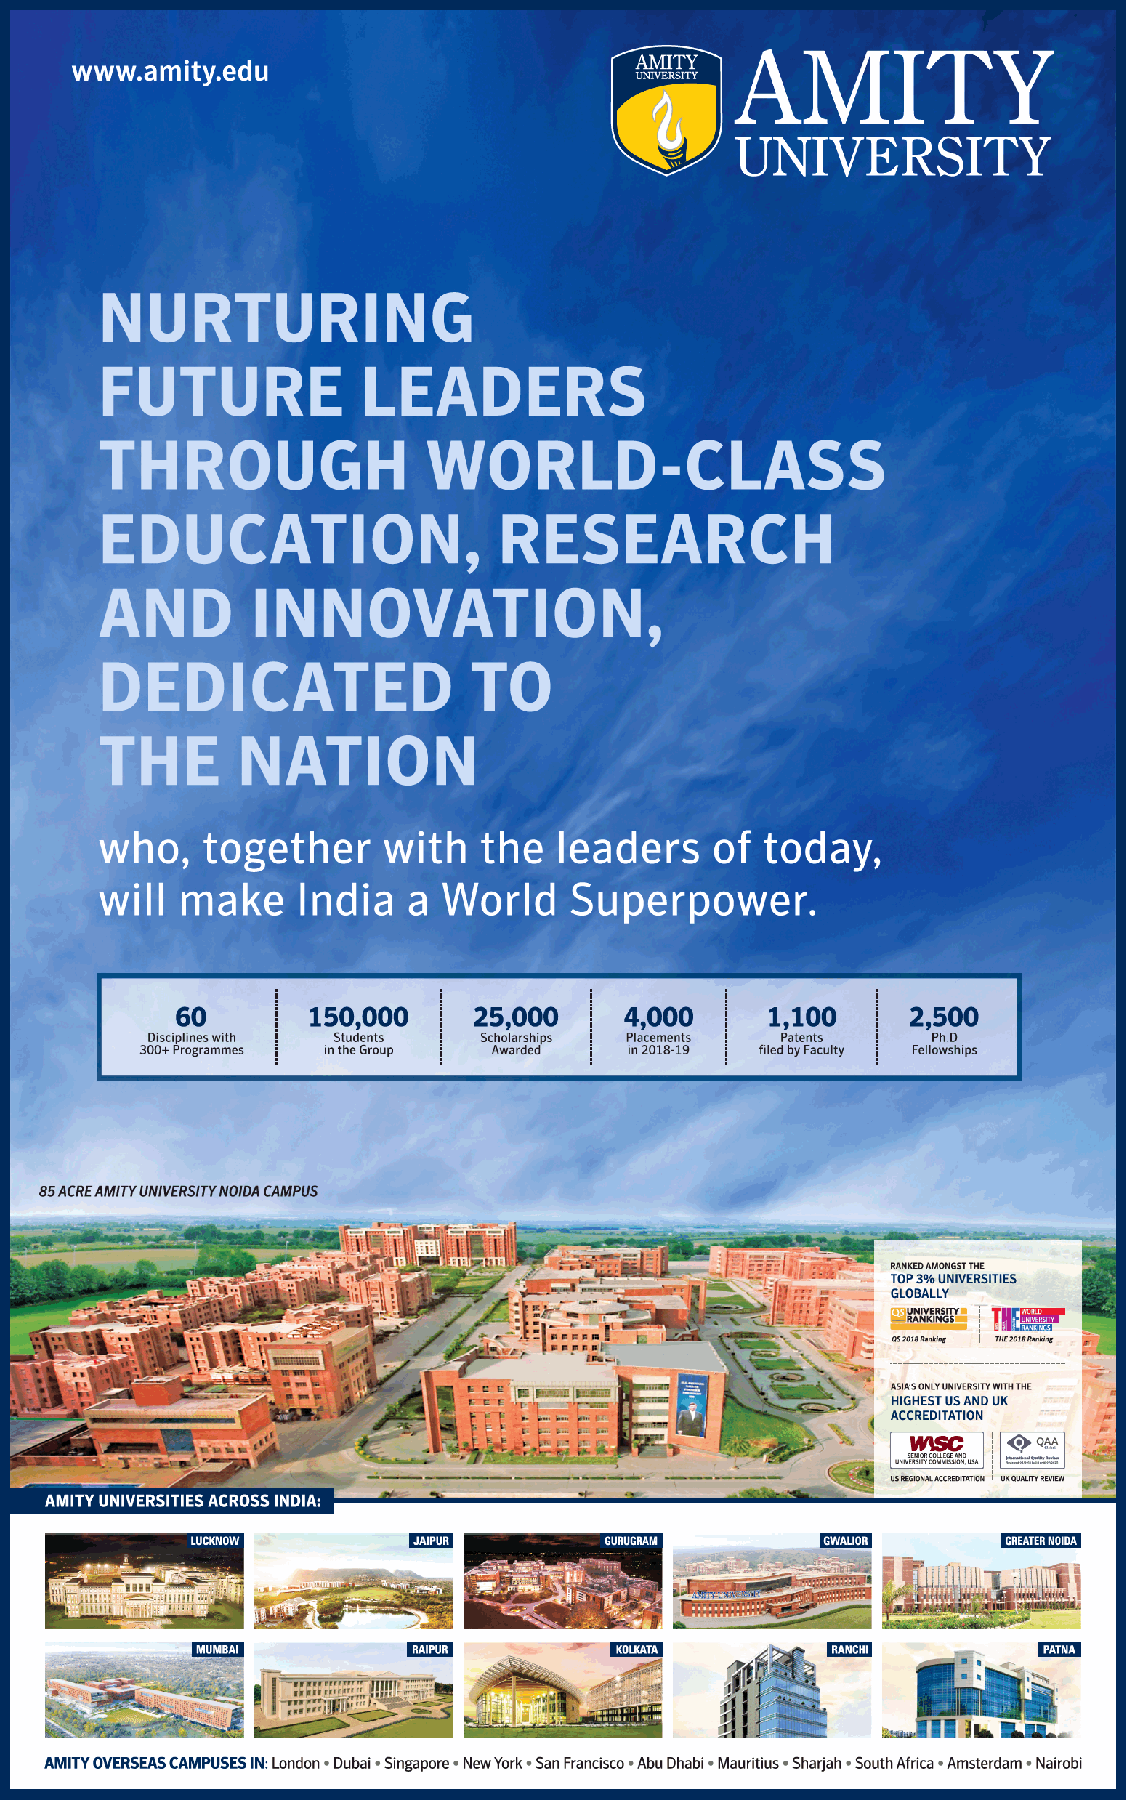 amity-university-nurturing-future-leaders-ad-times-of-india-delhi-24-05-2019.png